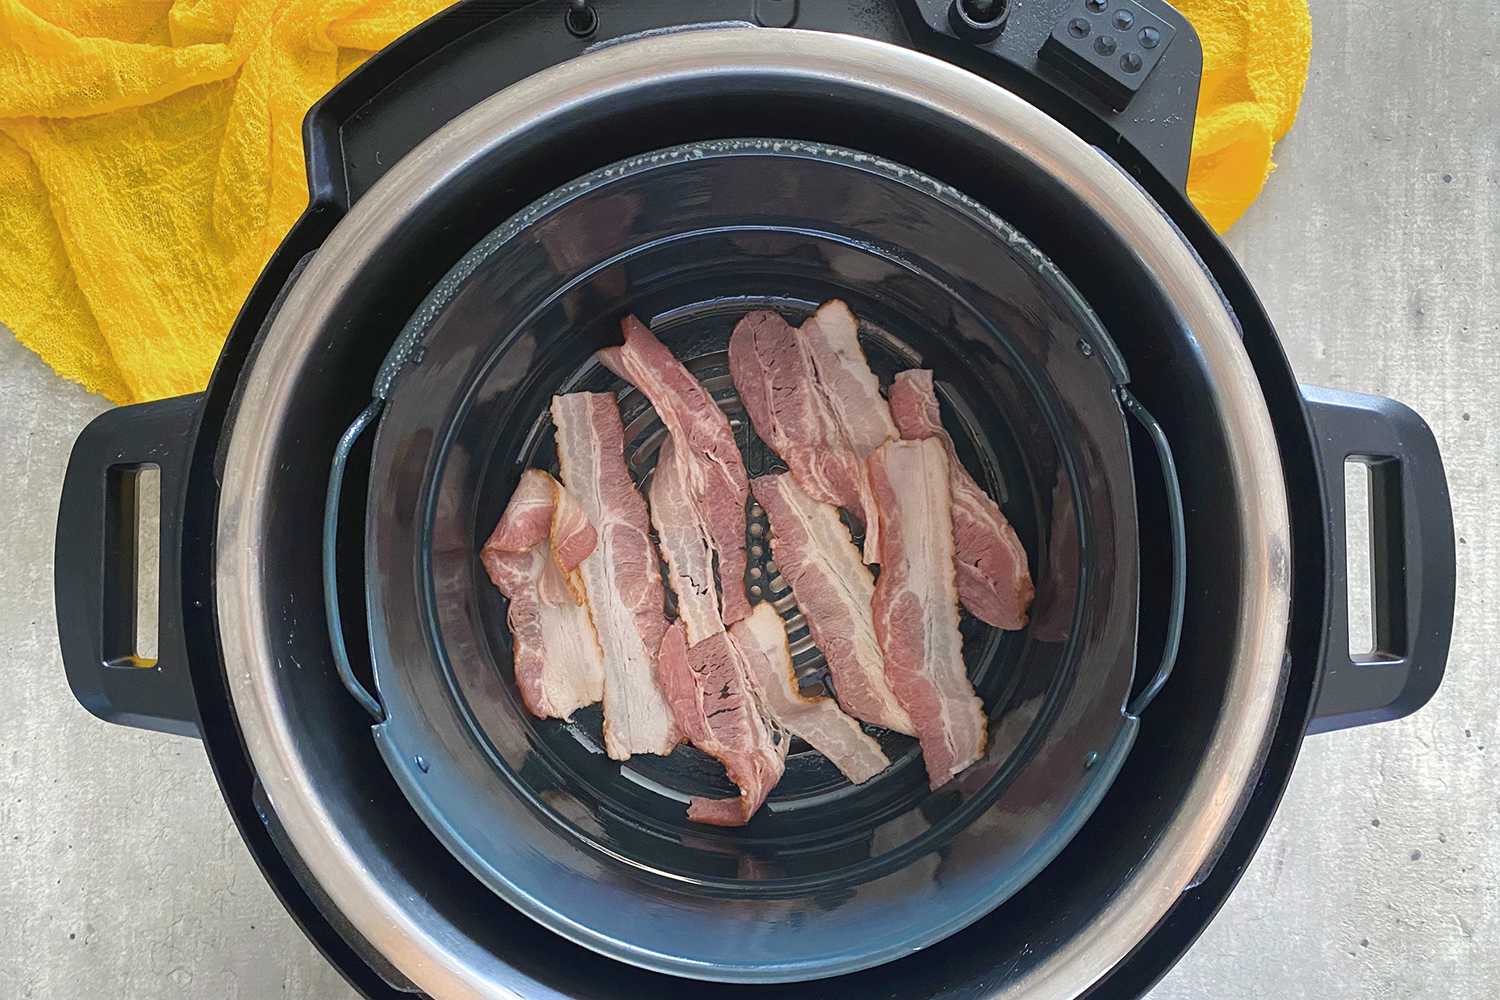 How Many Minutes Do I Cook Bacon In An Electric Pressure Cooker